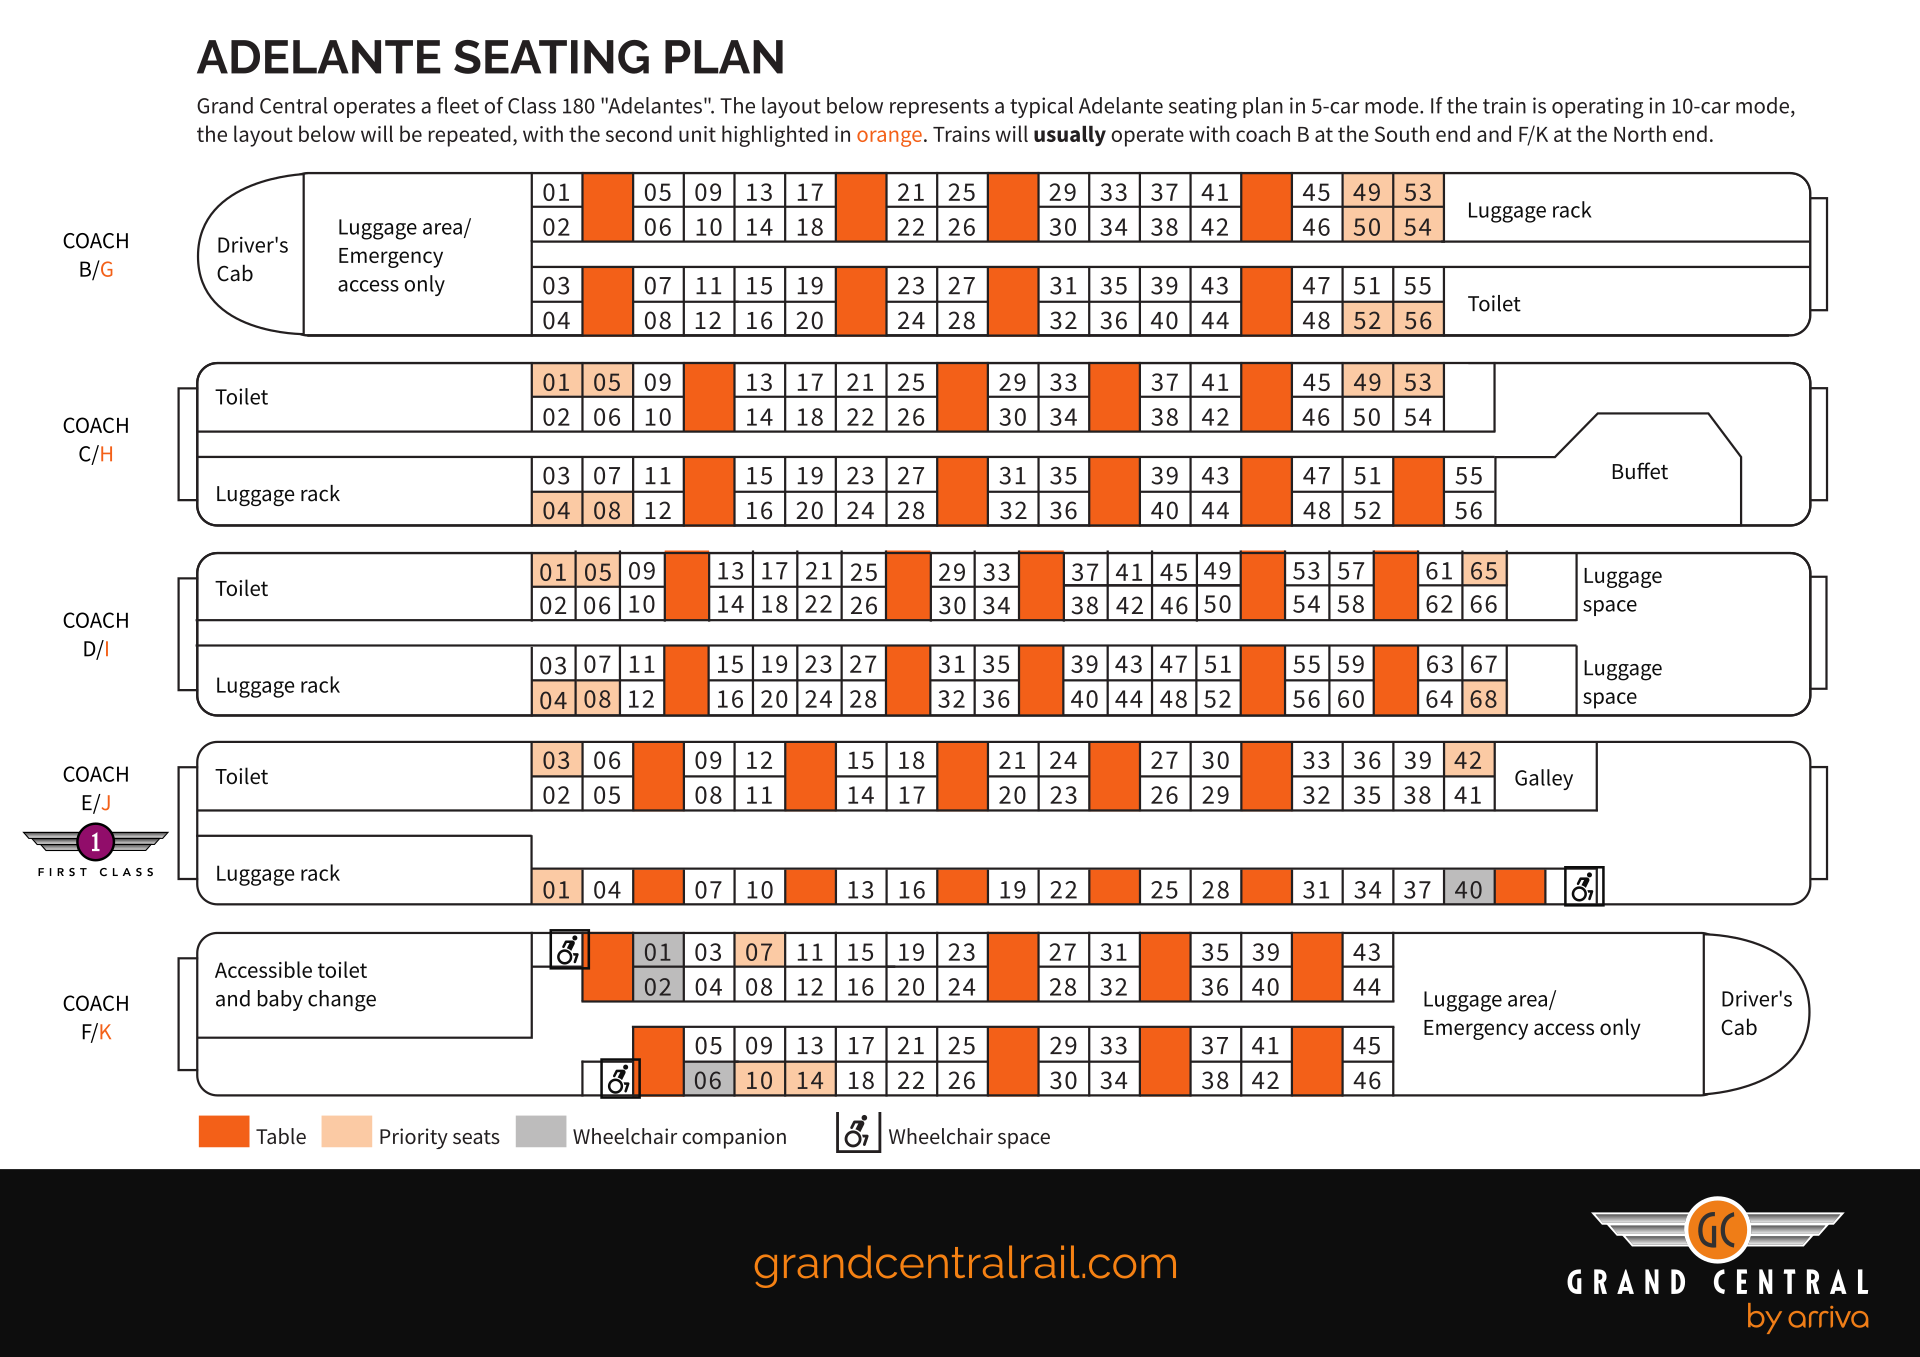 Grand Central seating plan